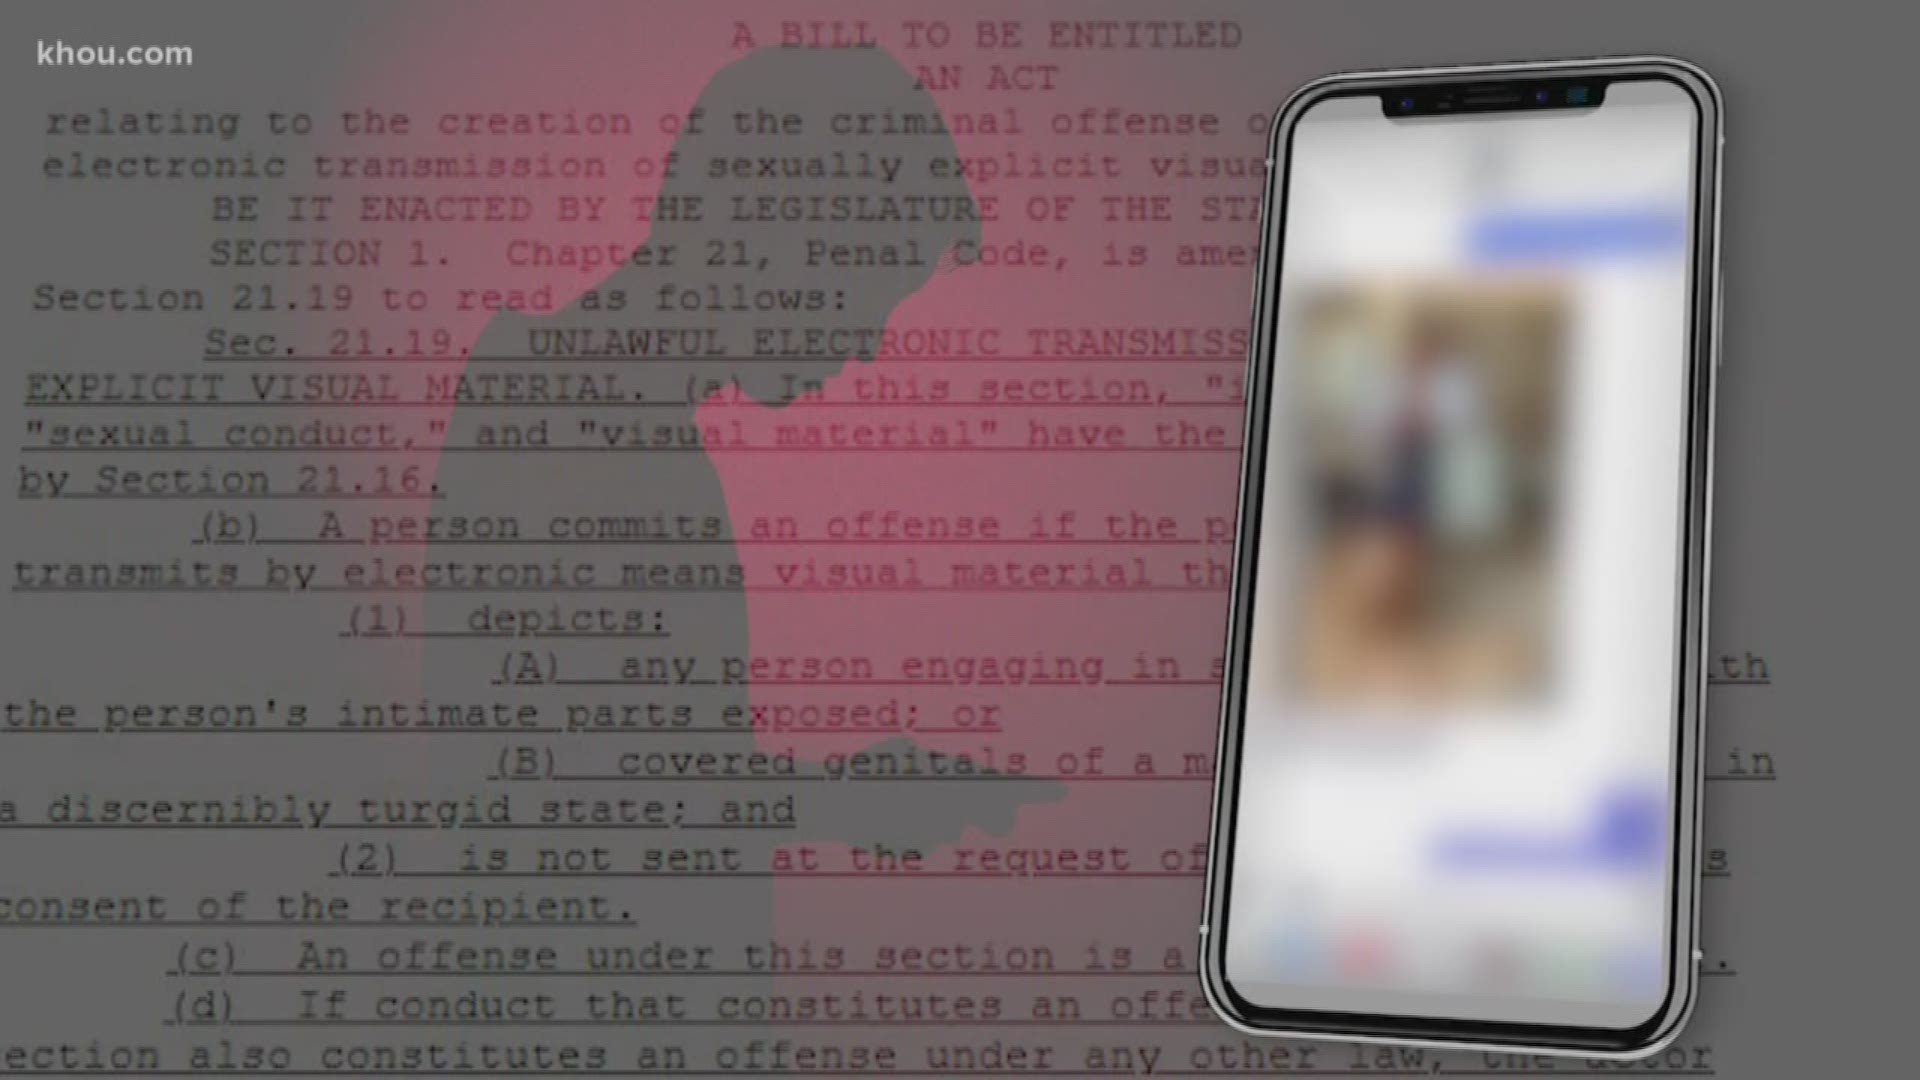 It is now a Class C misdemeanor to electronically send unwanted sexually explicit images of a person's intimate parts exposed -- or covered if you can see that a man is “excited.”